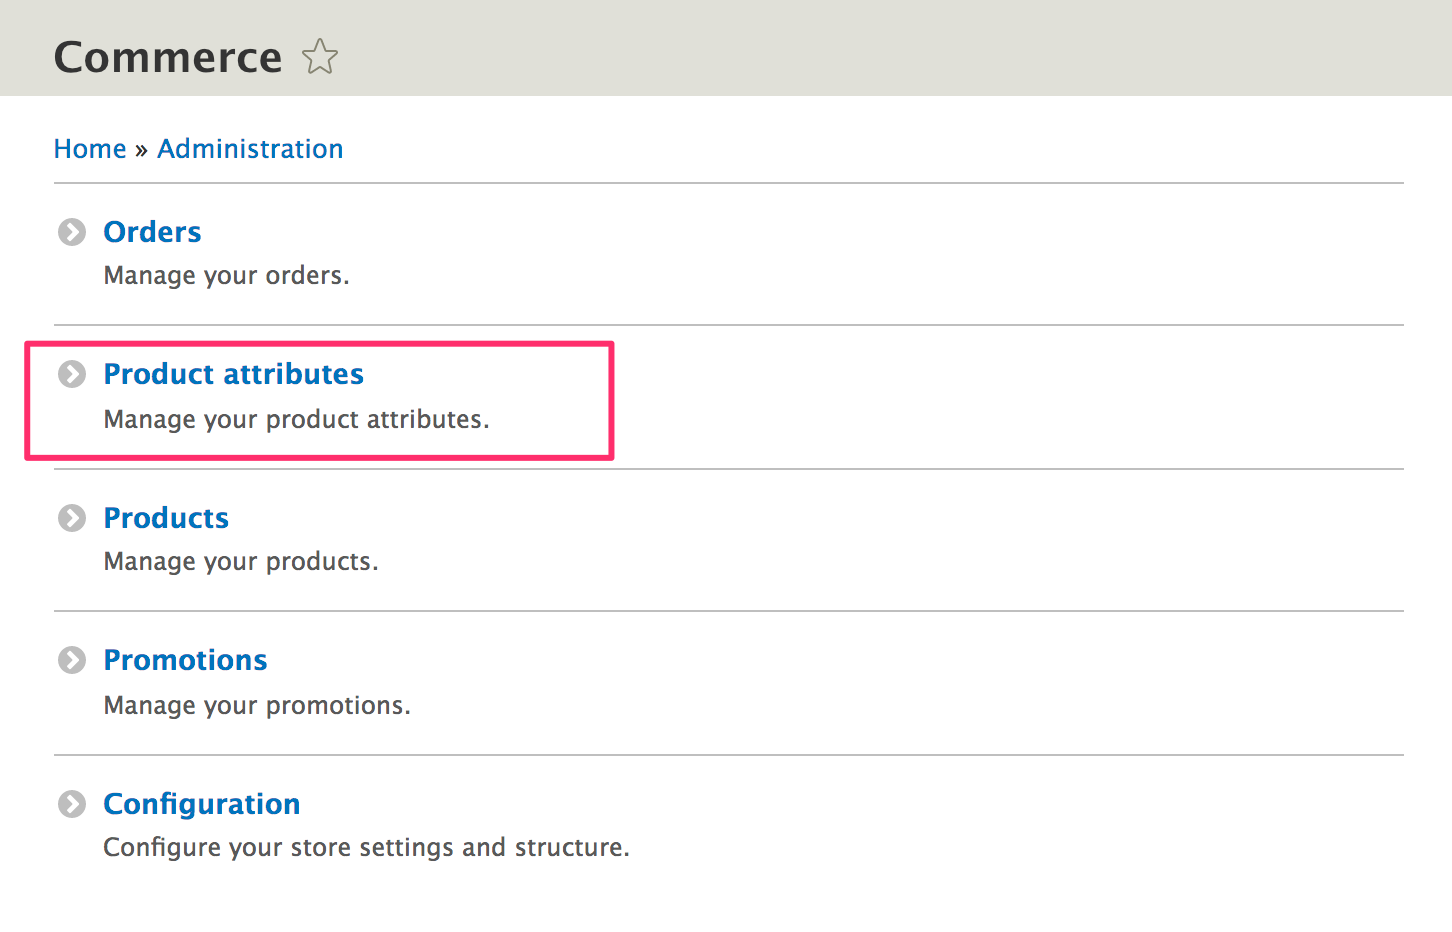 Product attributes from administration page